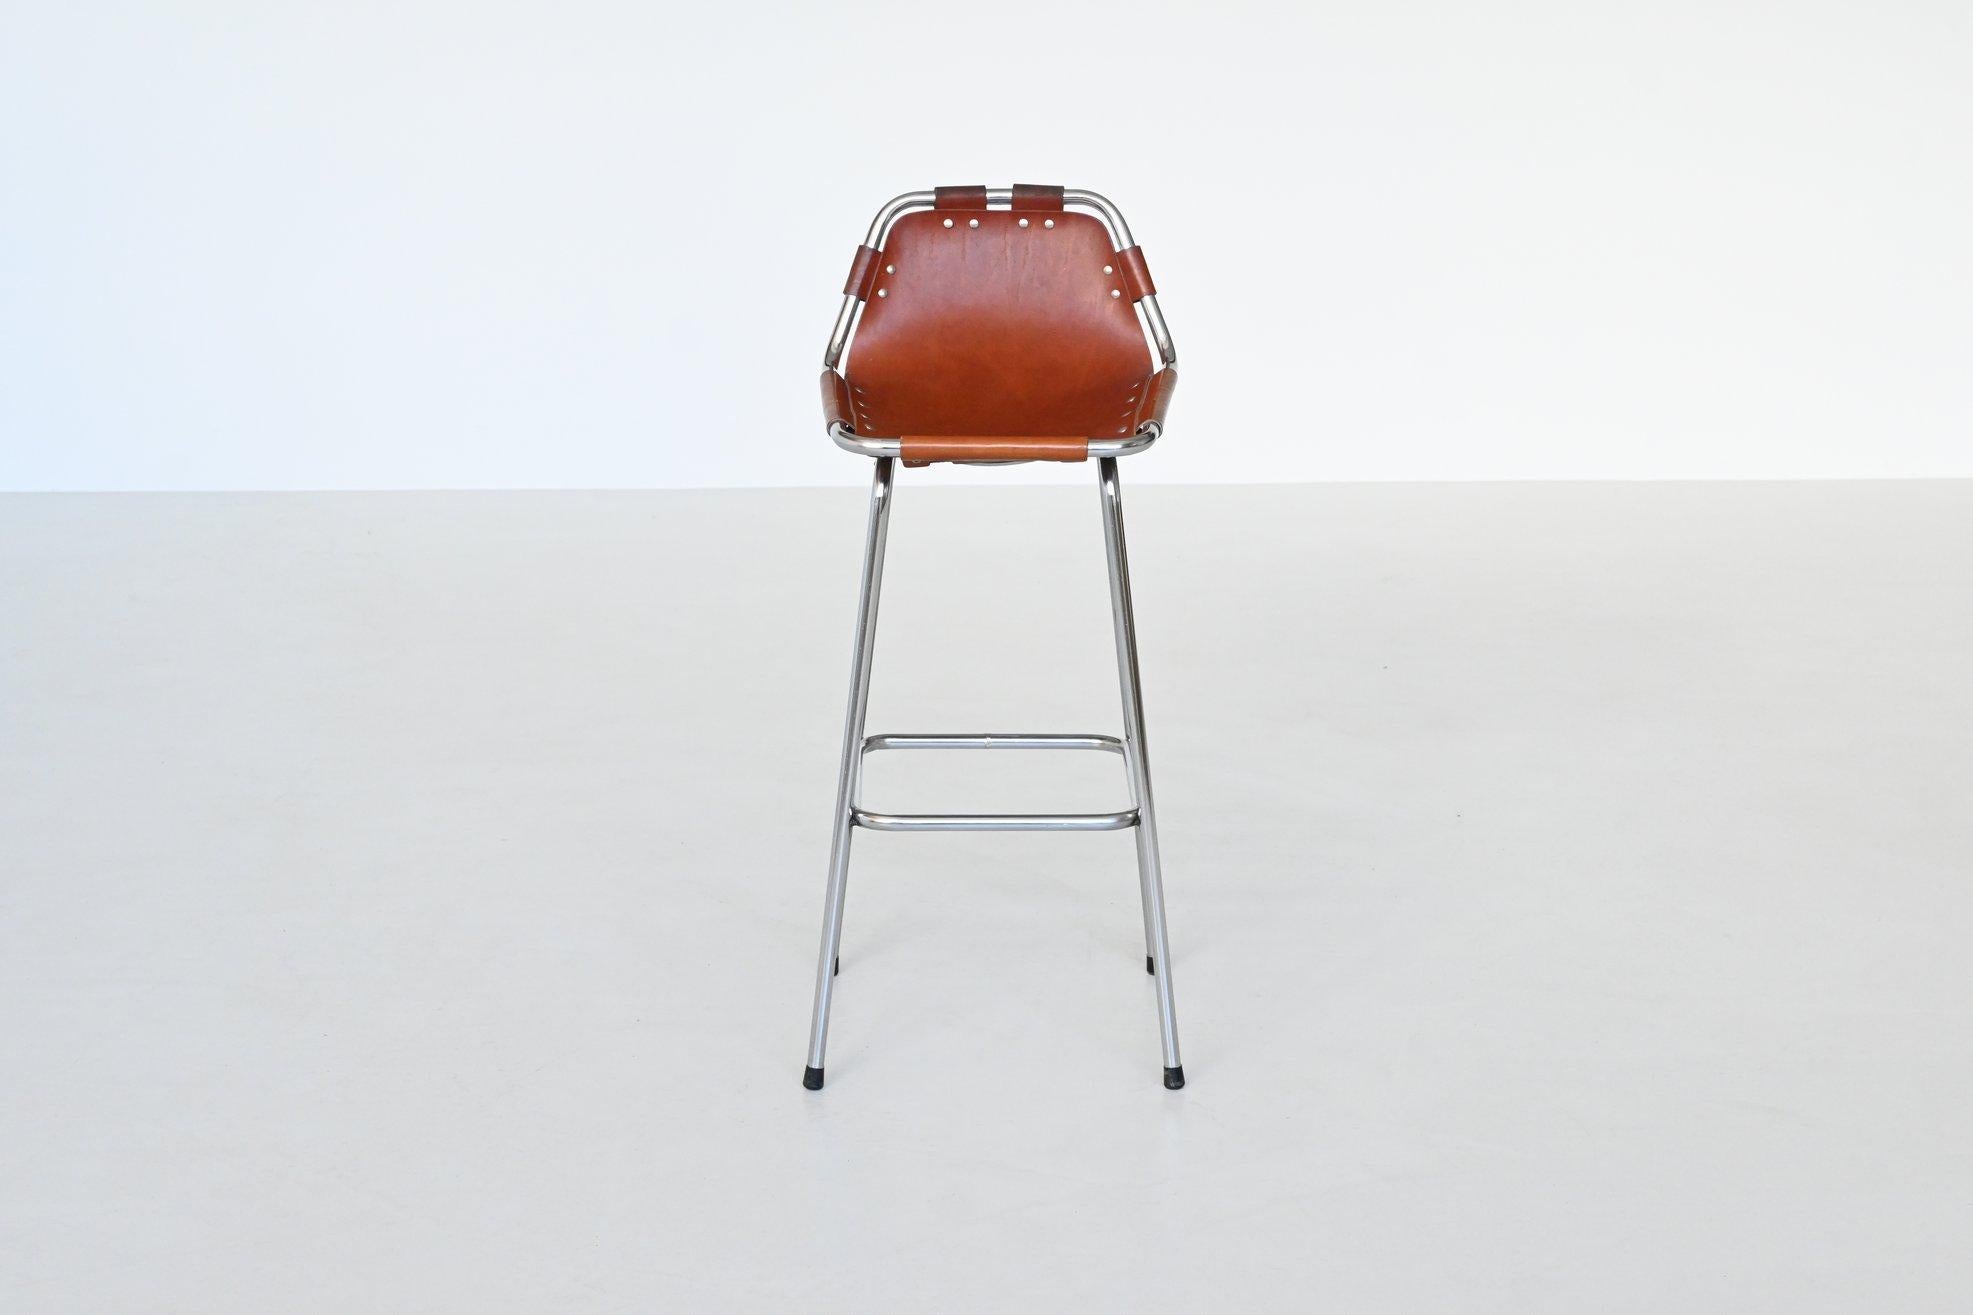 Beautiful shaped bar stool used by Charlotte Perriand for Les Arcs ski resort, France 1960. The stool has a chrome plated tubular metal frame and thick natural saddle leather seat. This fantastic bar stool is strong, comfortable and look amazing in